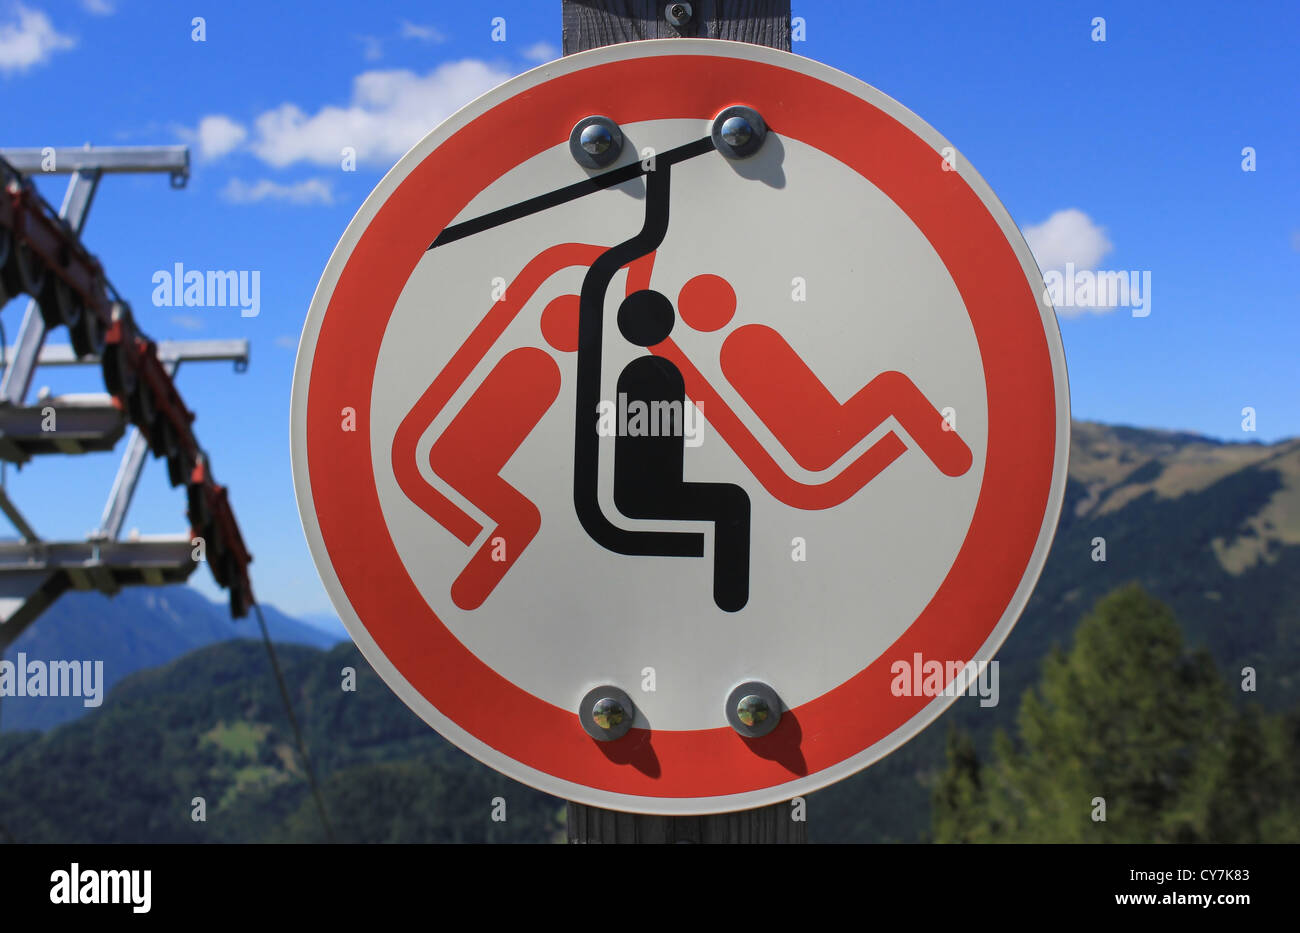 Calm down, stop swinging! - chair lift warning sign Stock Photo